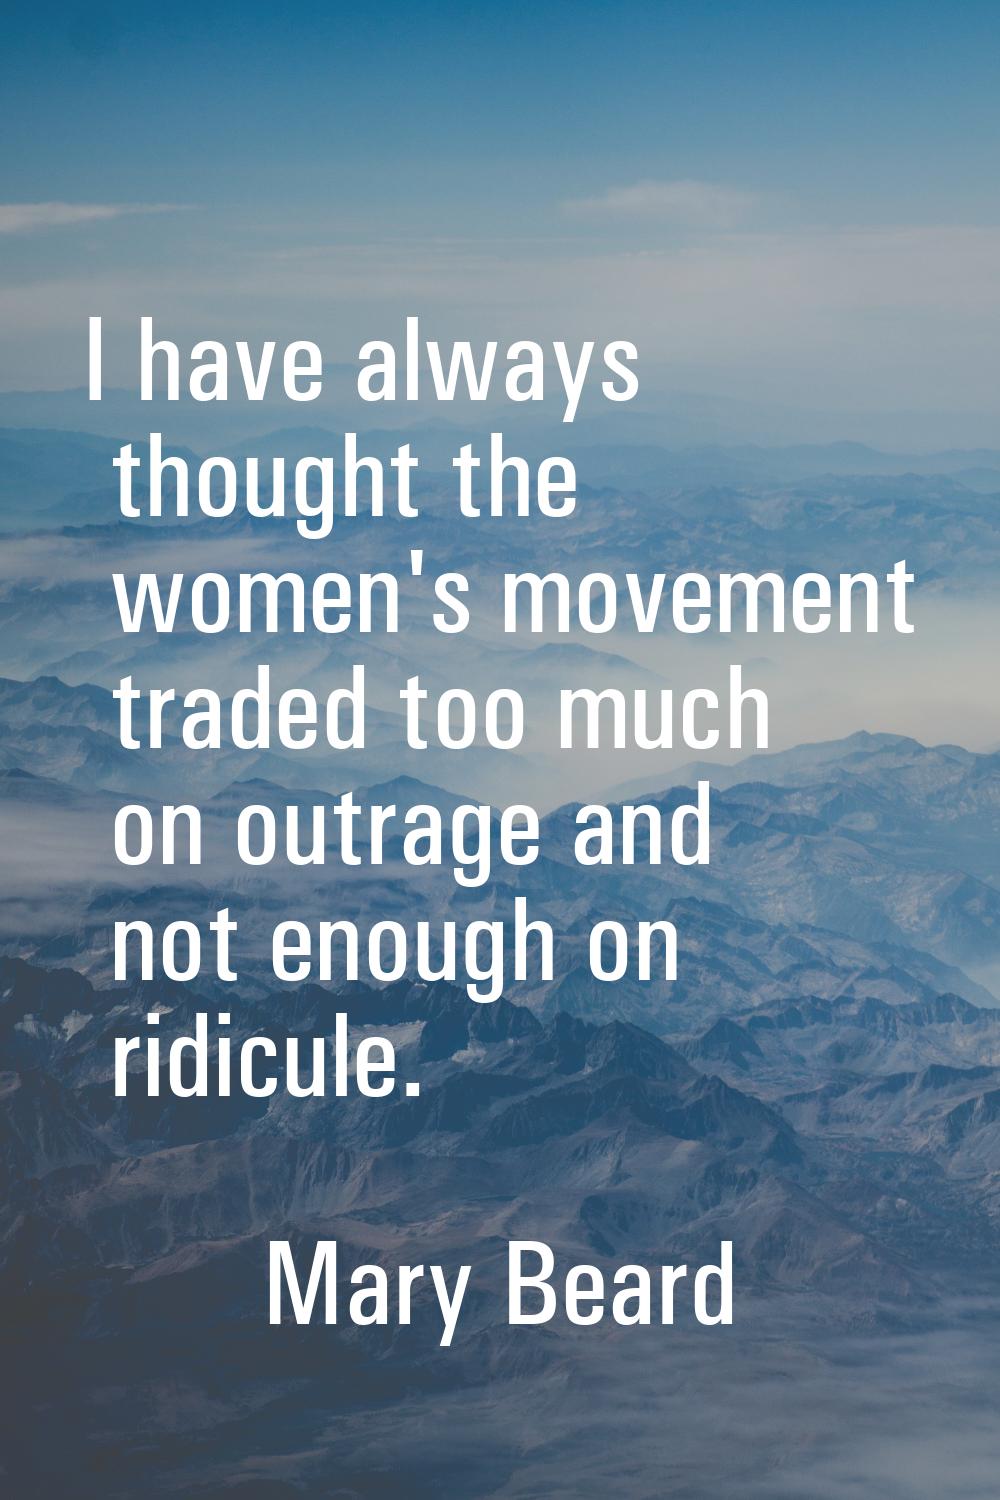 I have always thought the women's movement traded too much on outrage and not enough on ridicule.